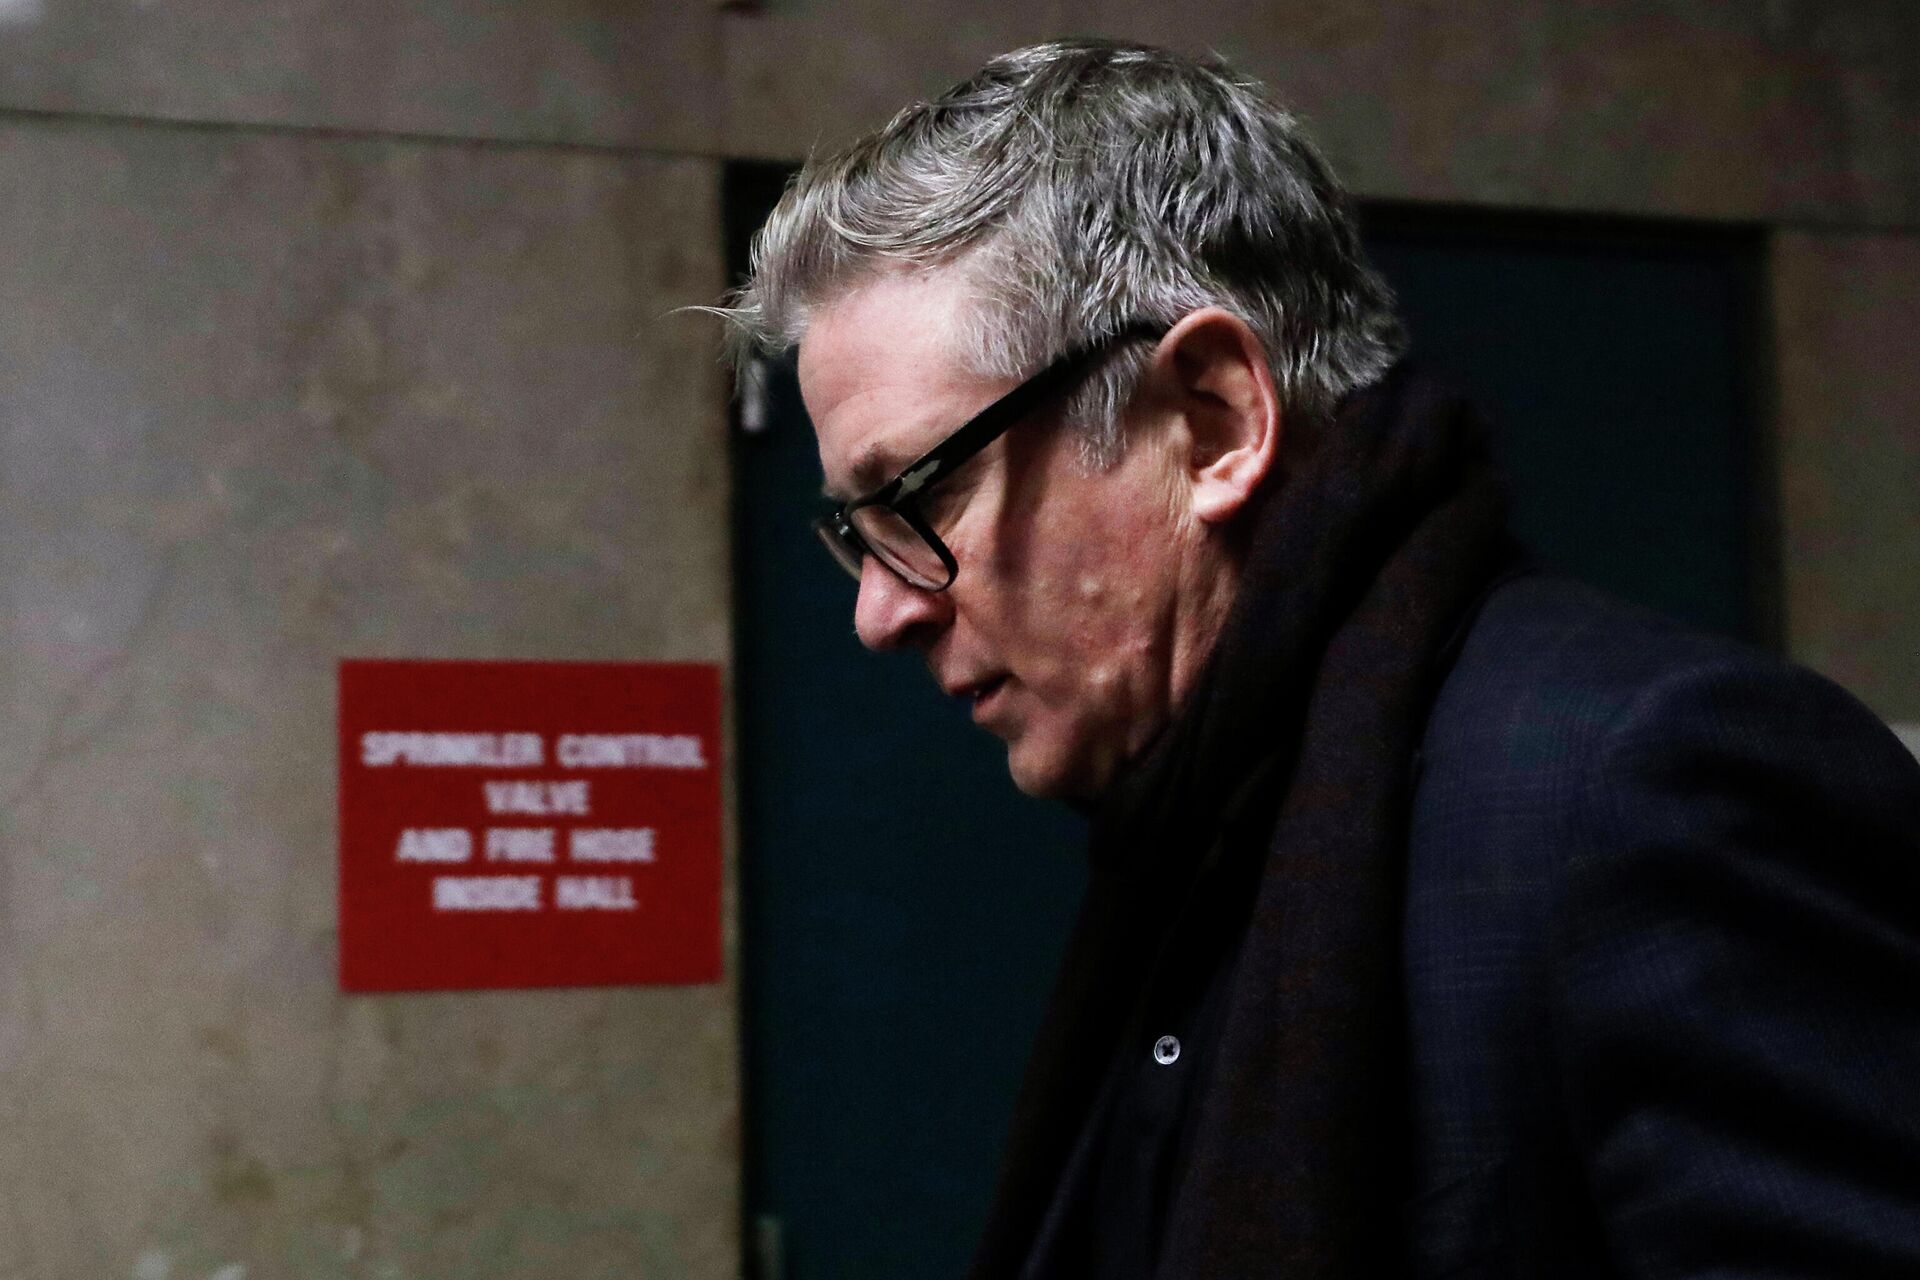 Actor Alec Baldwin arrives in a New York City court, Wednesday, Jan. 23, 2019, for a hearing on charges that he slugged a man during a dispute over a parking spot last fall - Sputnik International, 1920, 26.04.2022